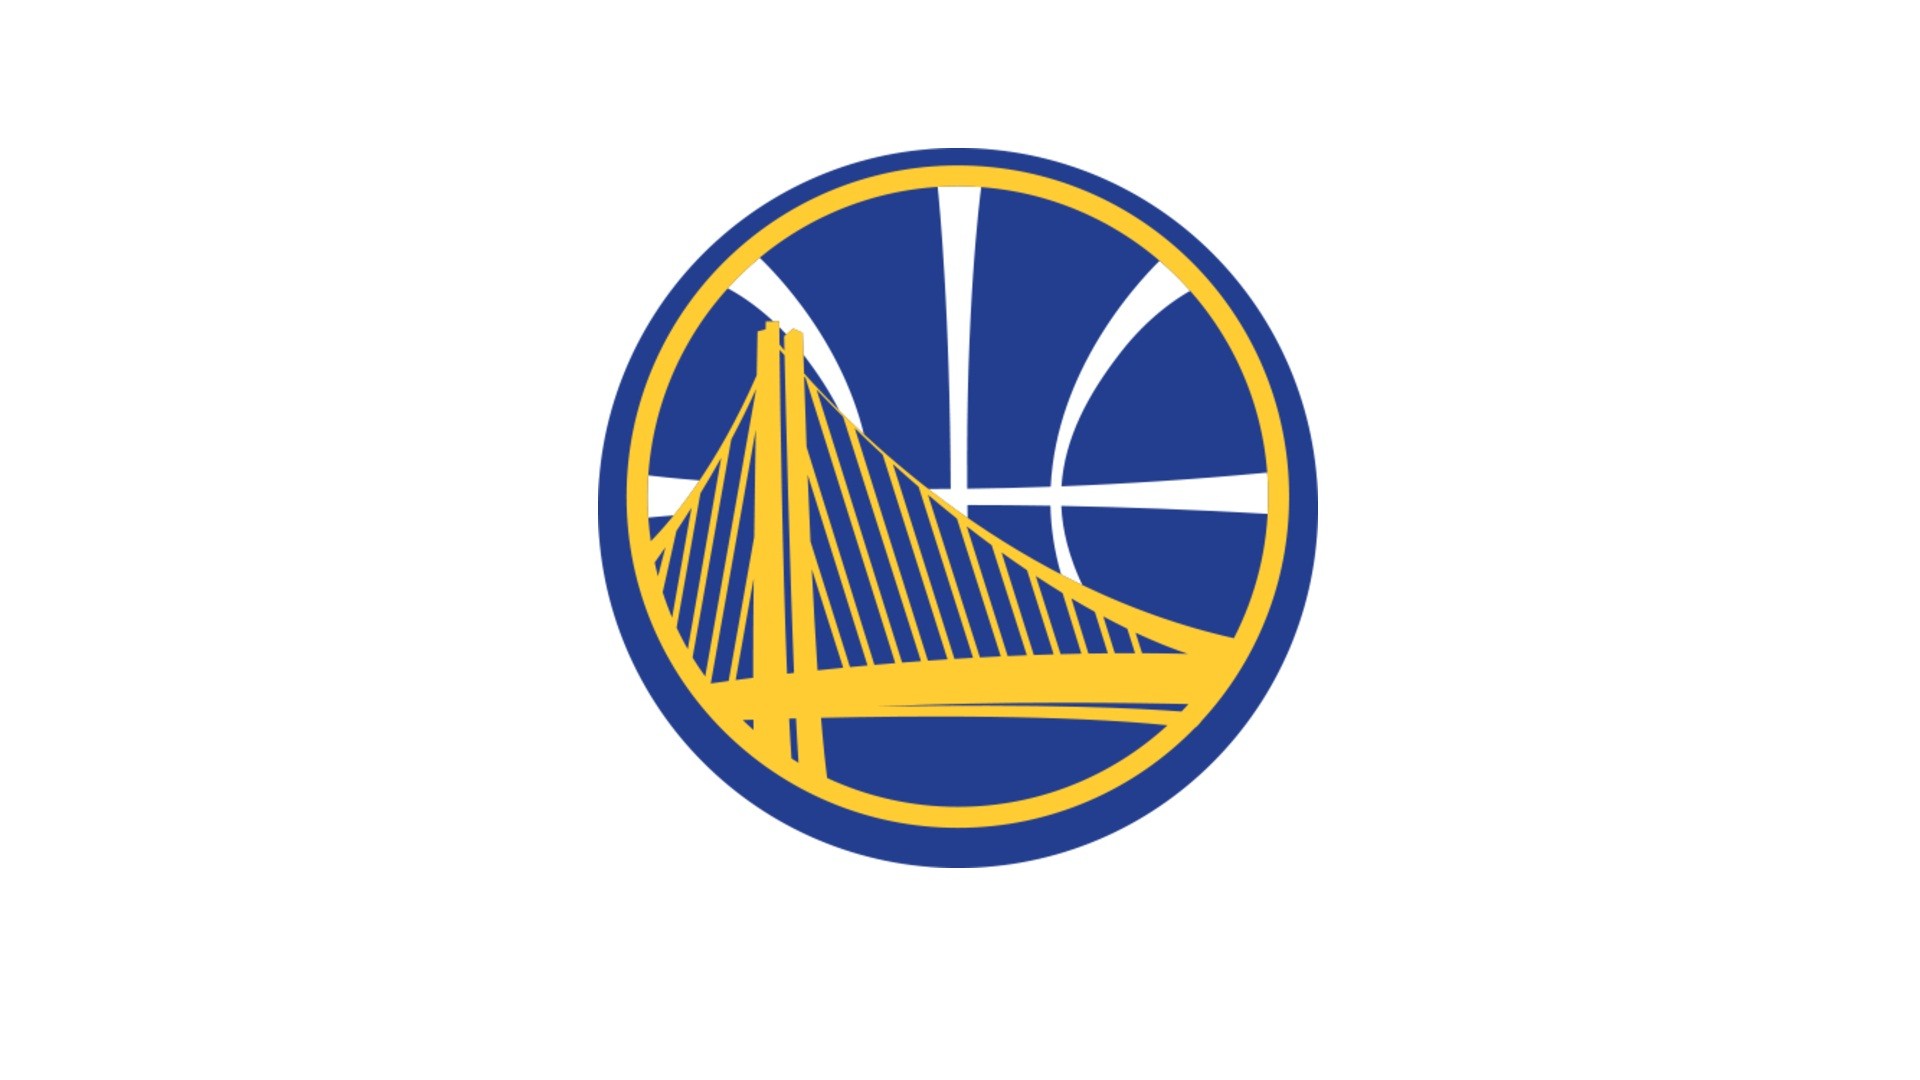 Wallpapers Golden State Warriors Logo with image dimensions 1920x1080 pixel. You can make this wallpaper for your Desktop Computer Backgrounds, Windows or Mac Screensavers, iPhone Lock screen, Tablet or Android and another Mobile Phone device